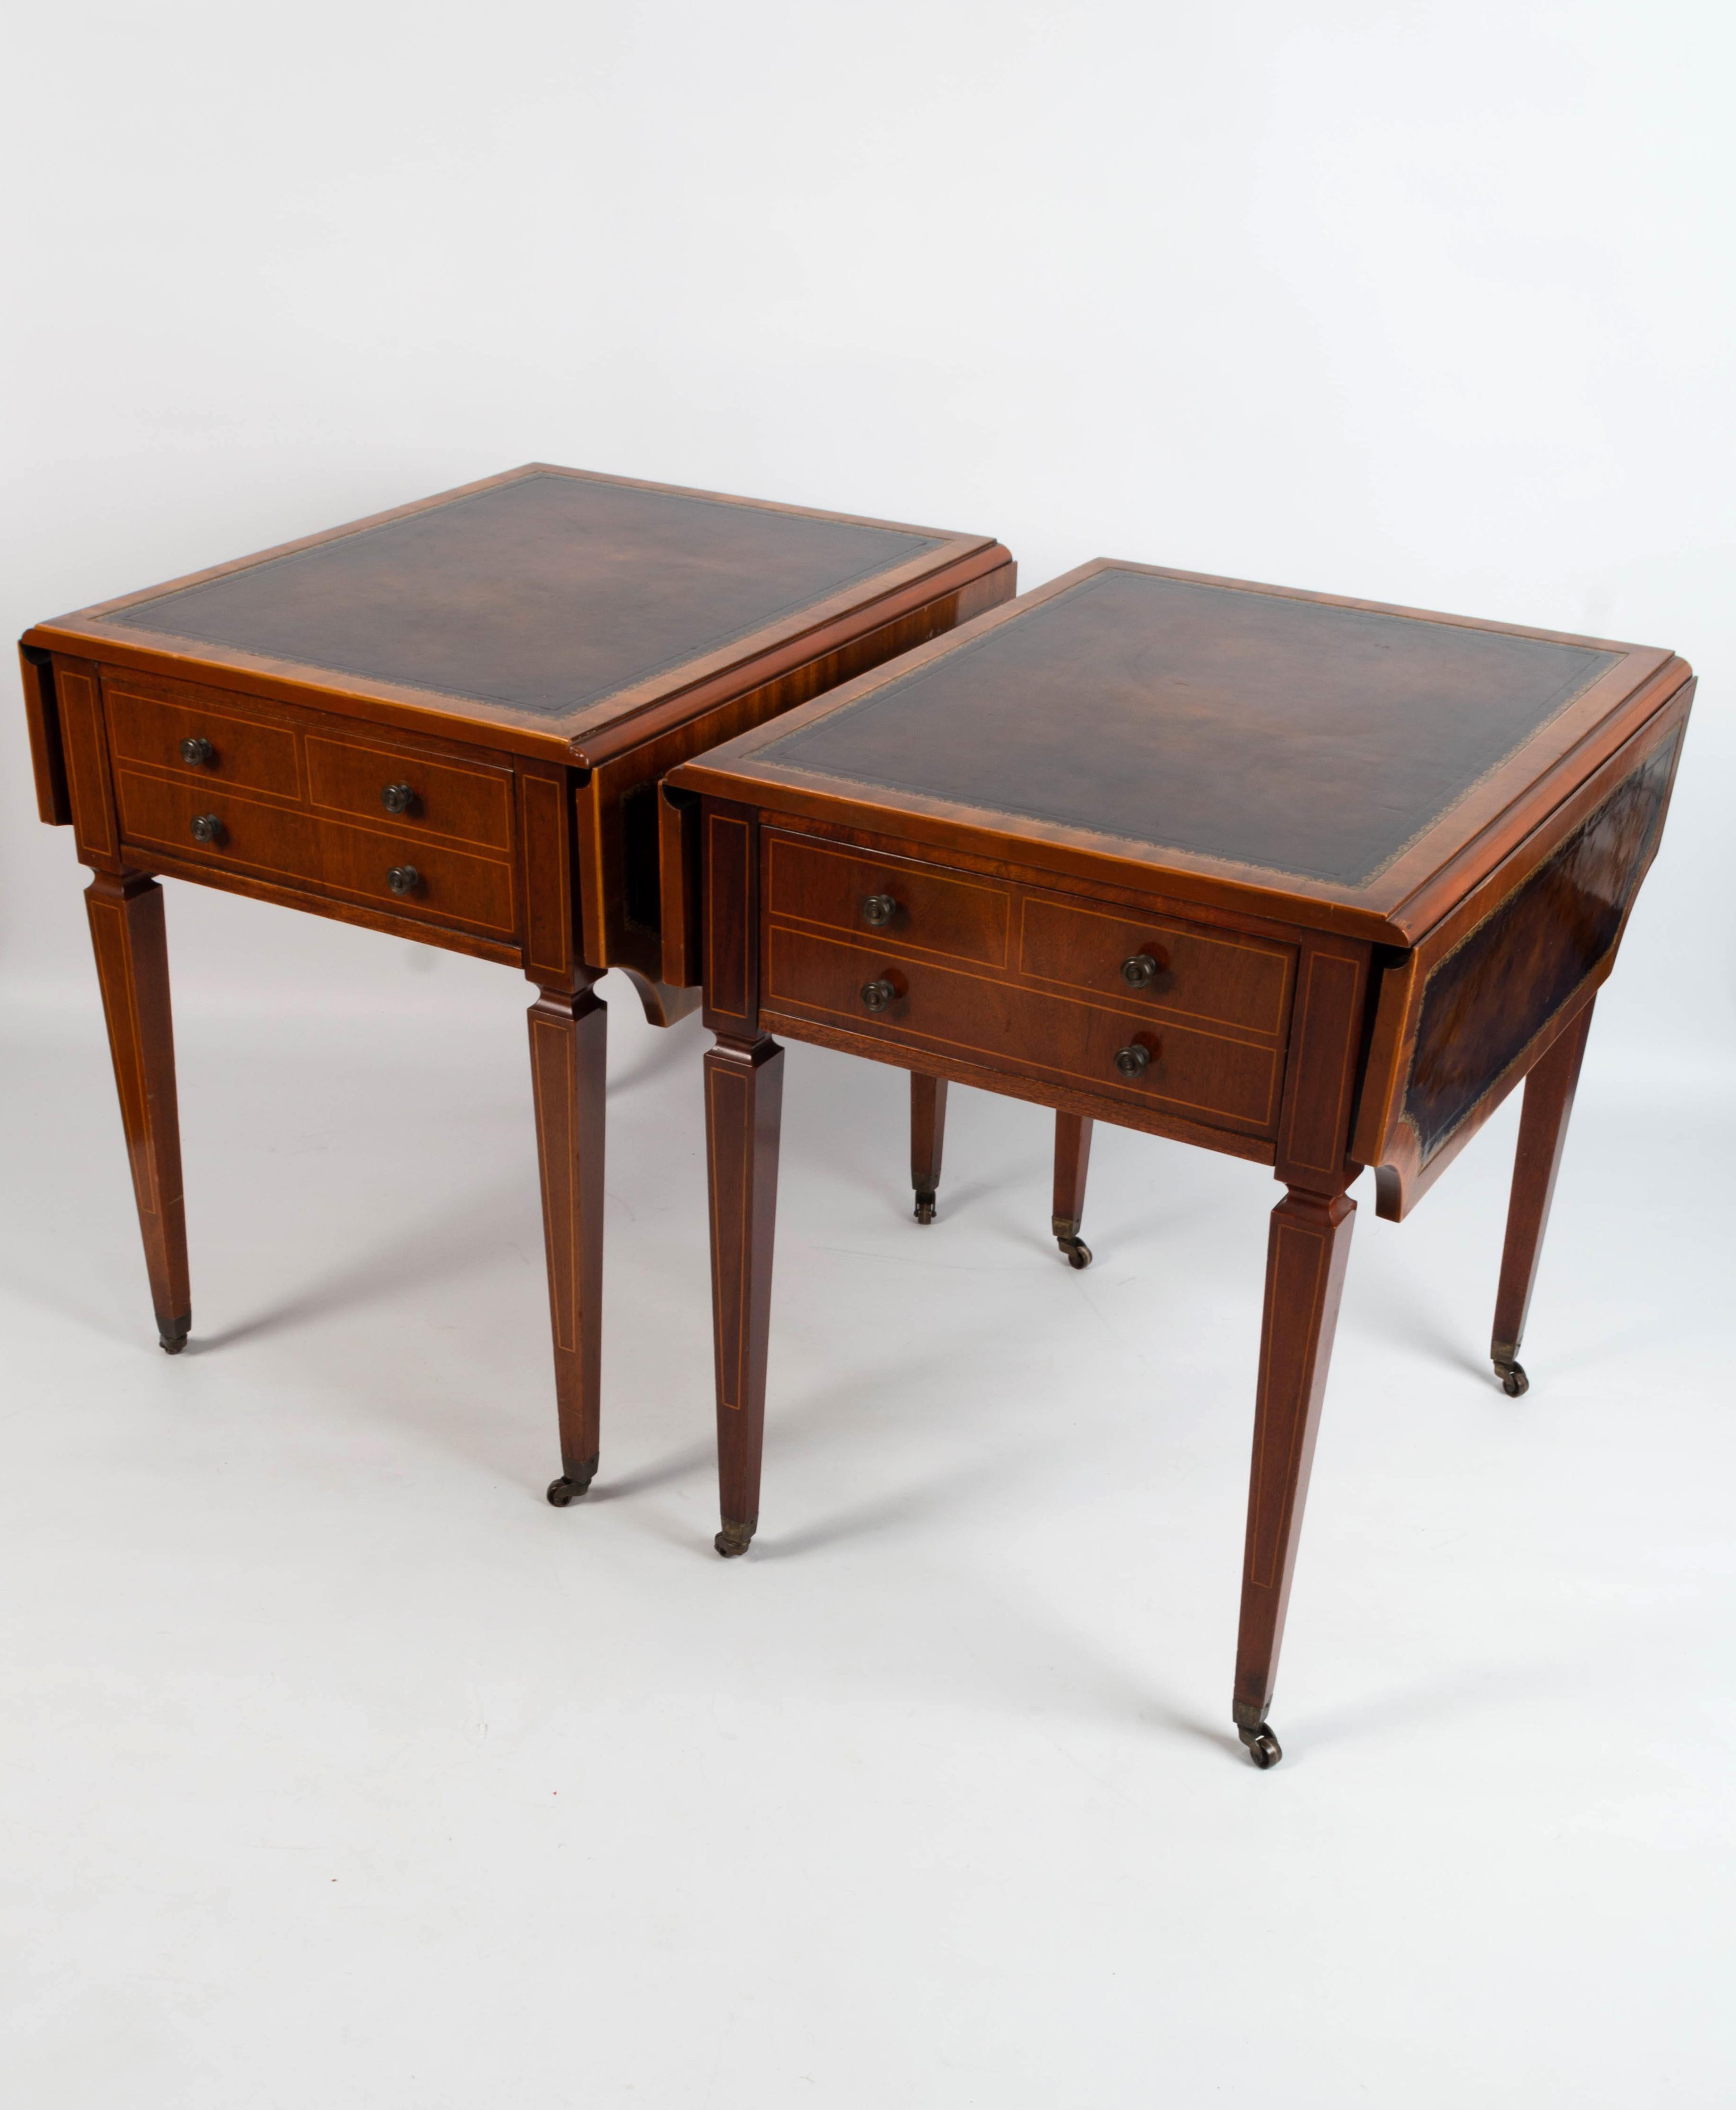 A pair of fine quality Georgian 18th century Sheraton Revival drop sofa tables with leather inset tops.
Constructed in Mahogany with Satinwood Inlay. Raised on square tapered legs, terminating on castors. 

In excellent condition commensurate